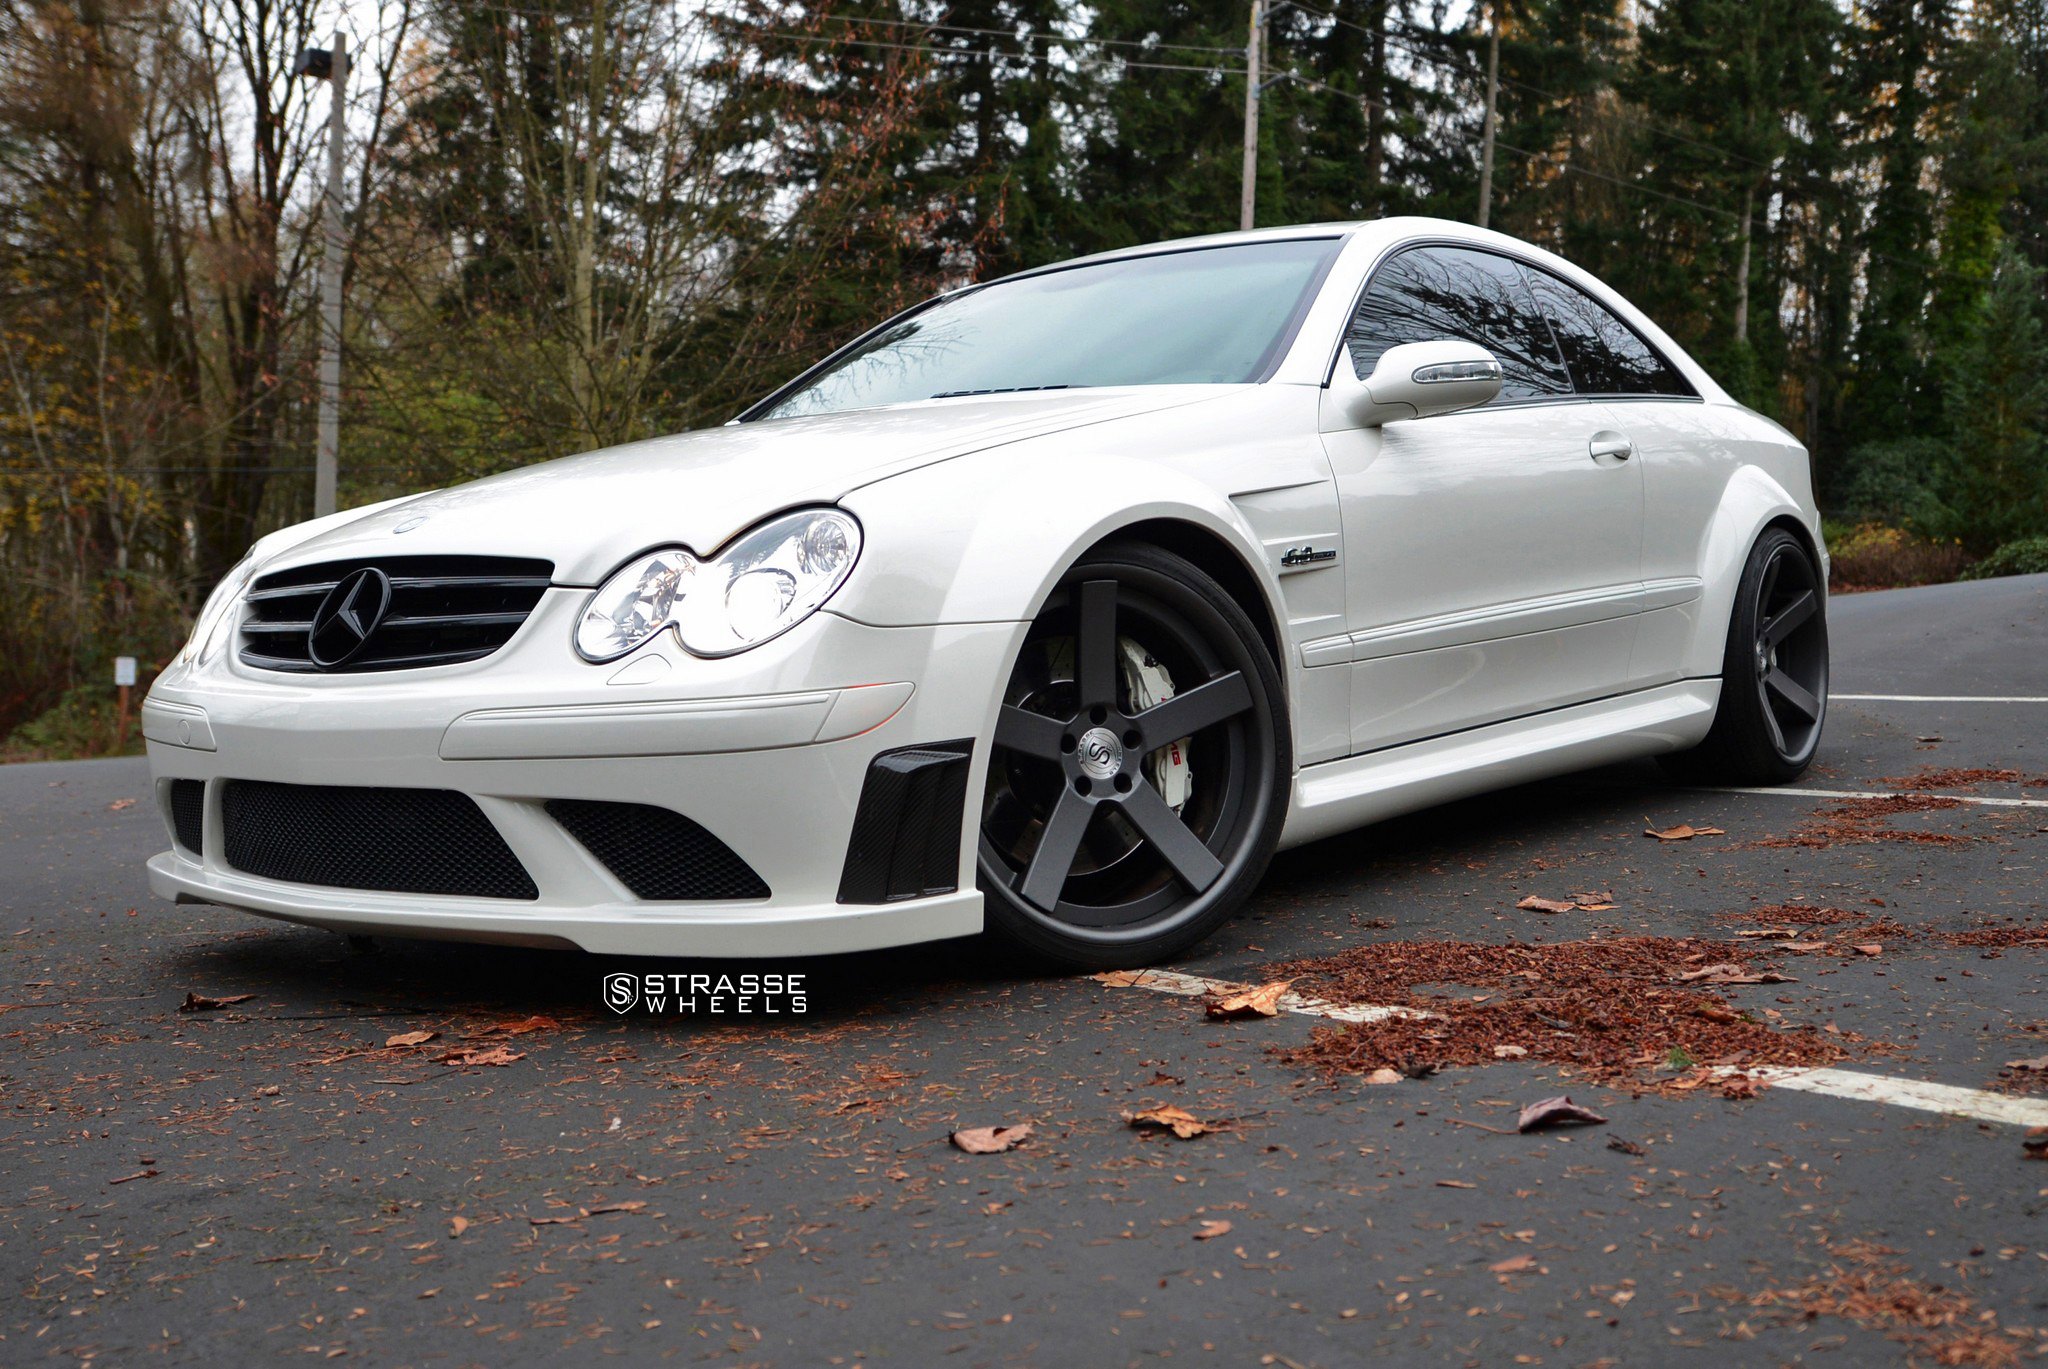 Blacked Out Grille on White Mercedes CLK-Class - Photo by Strasse Forged